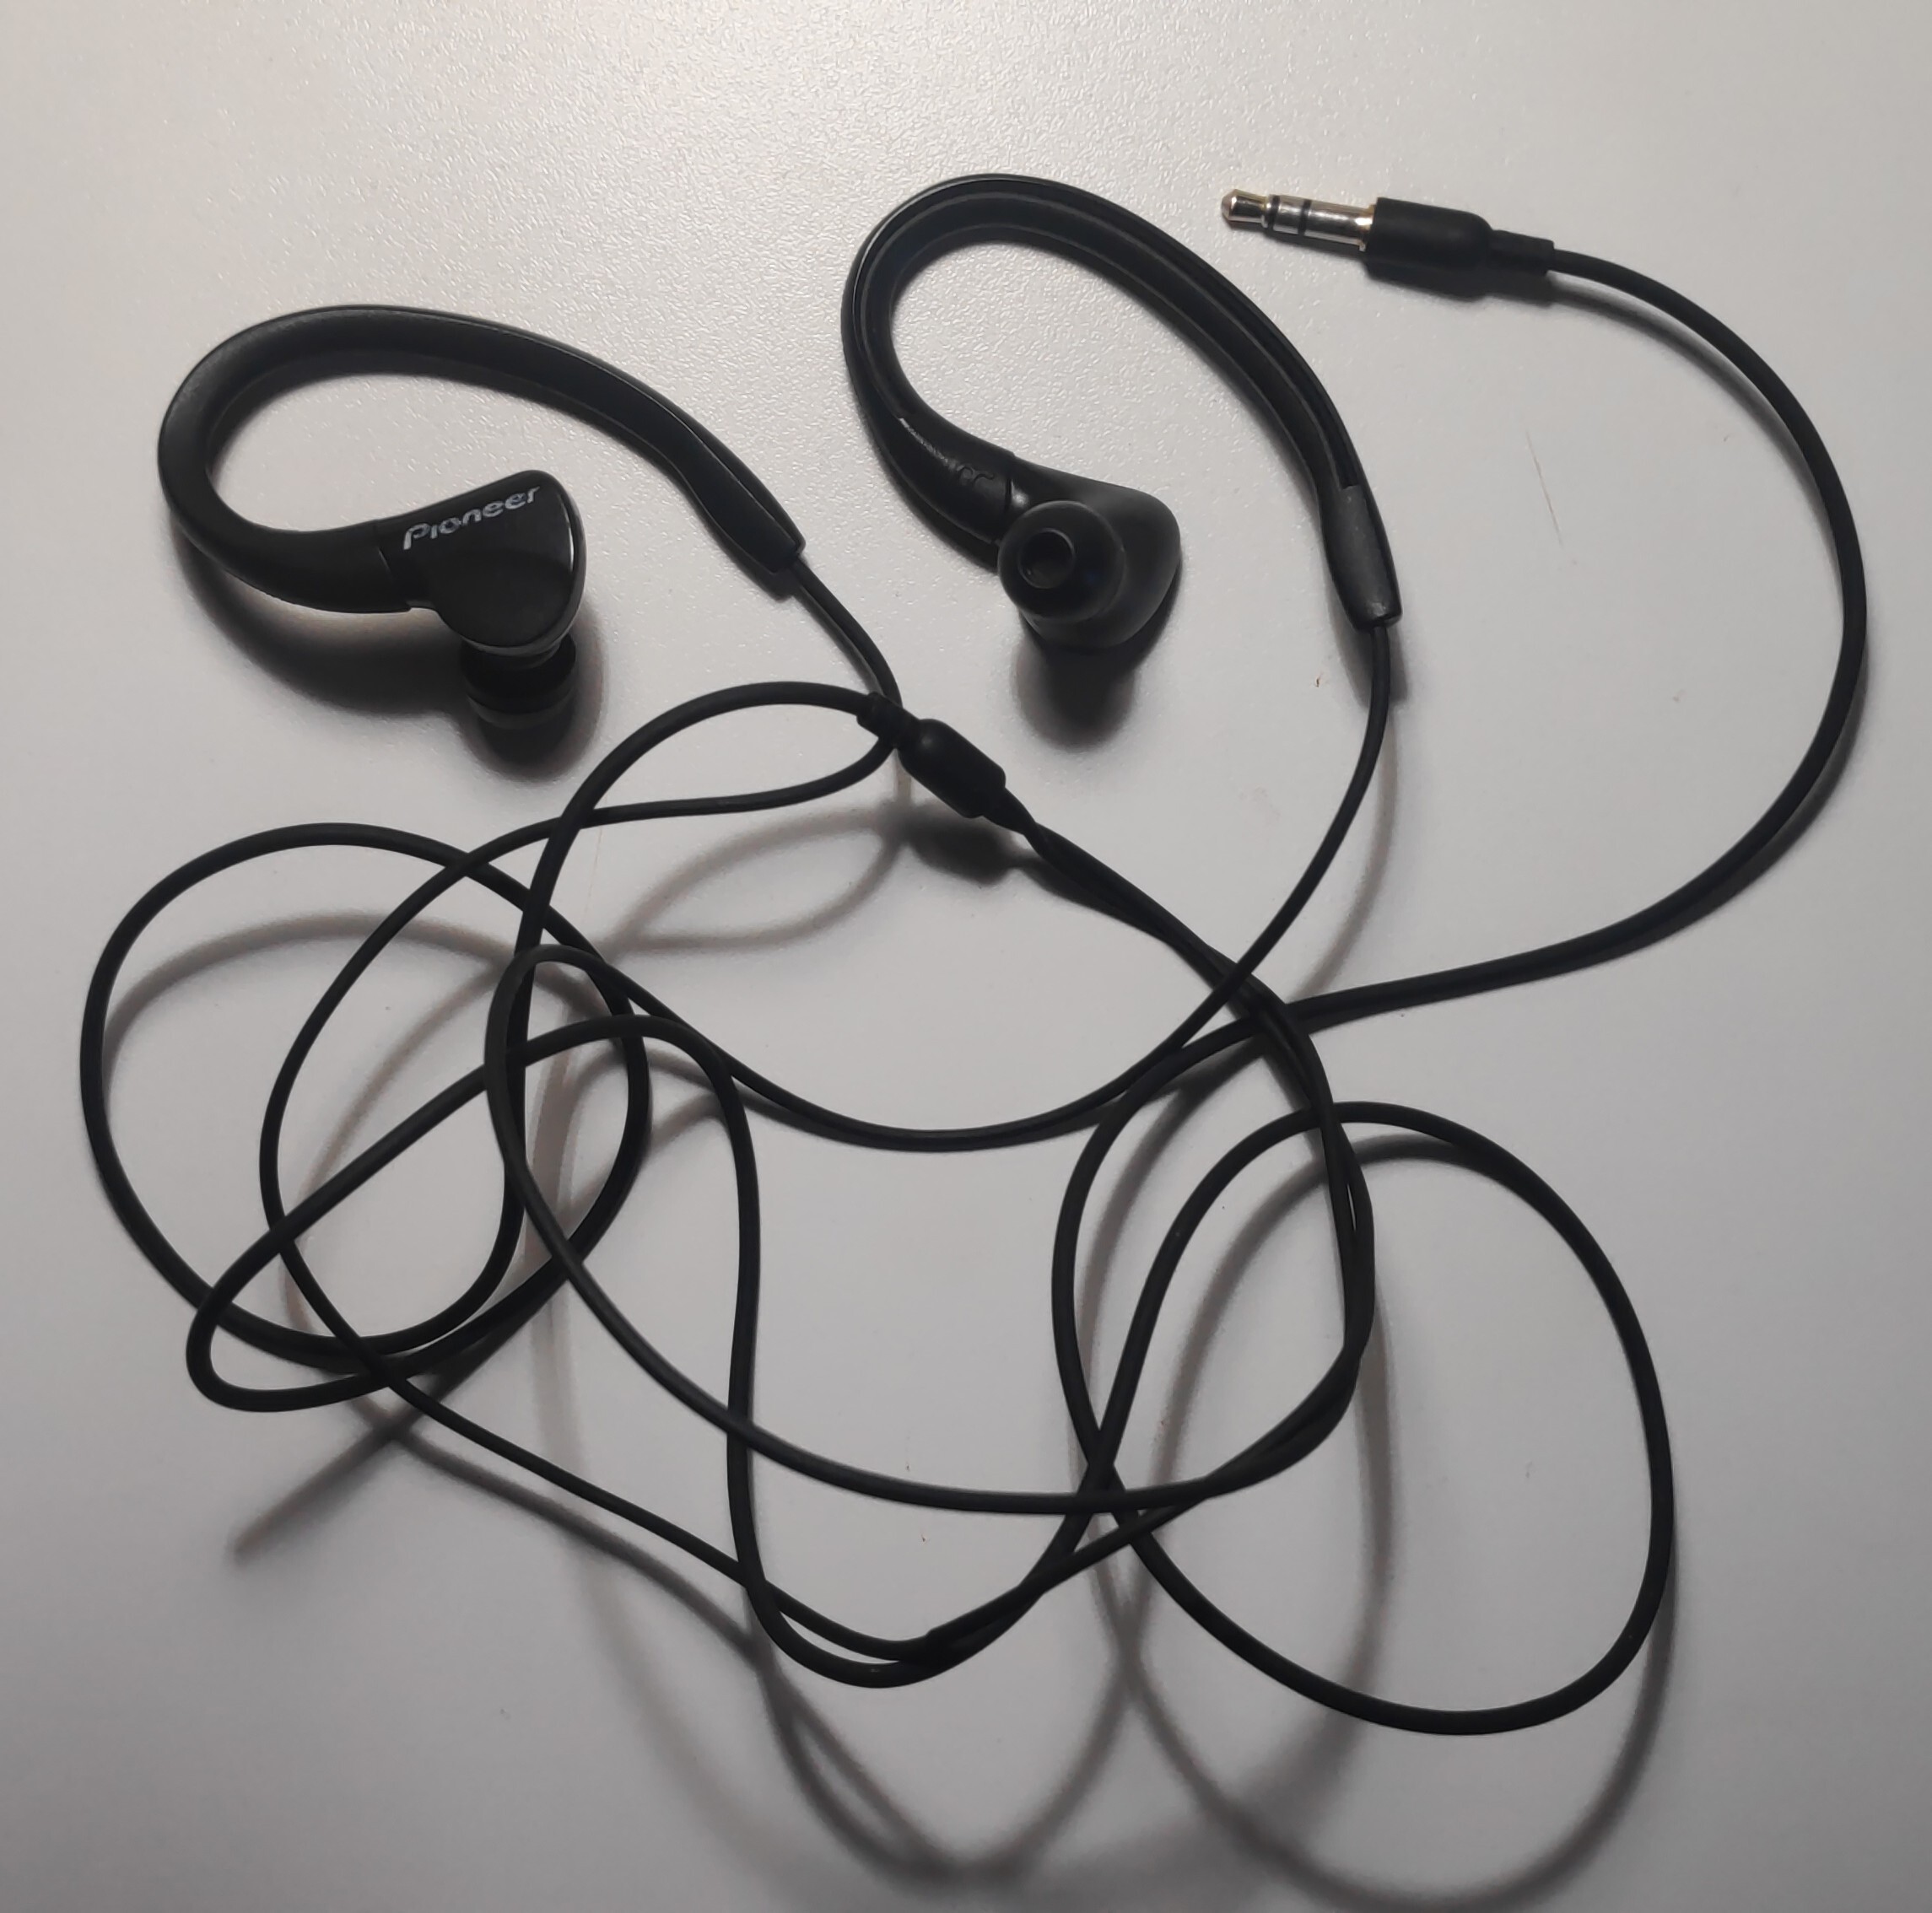 black wired earbuds with hooks